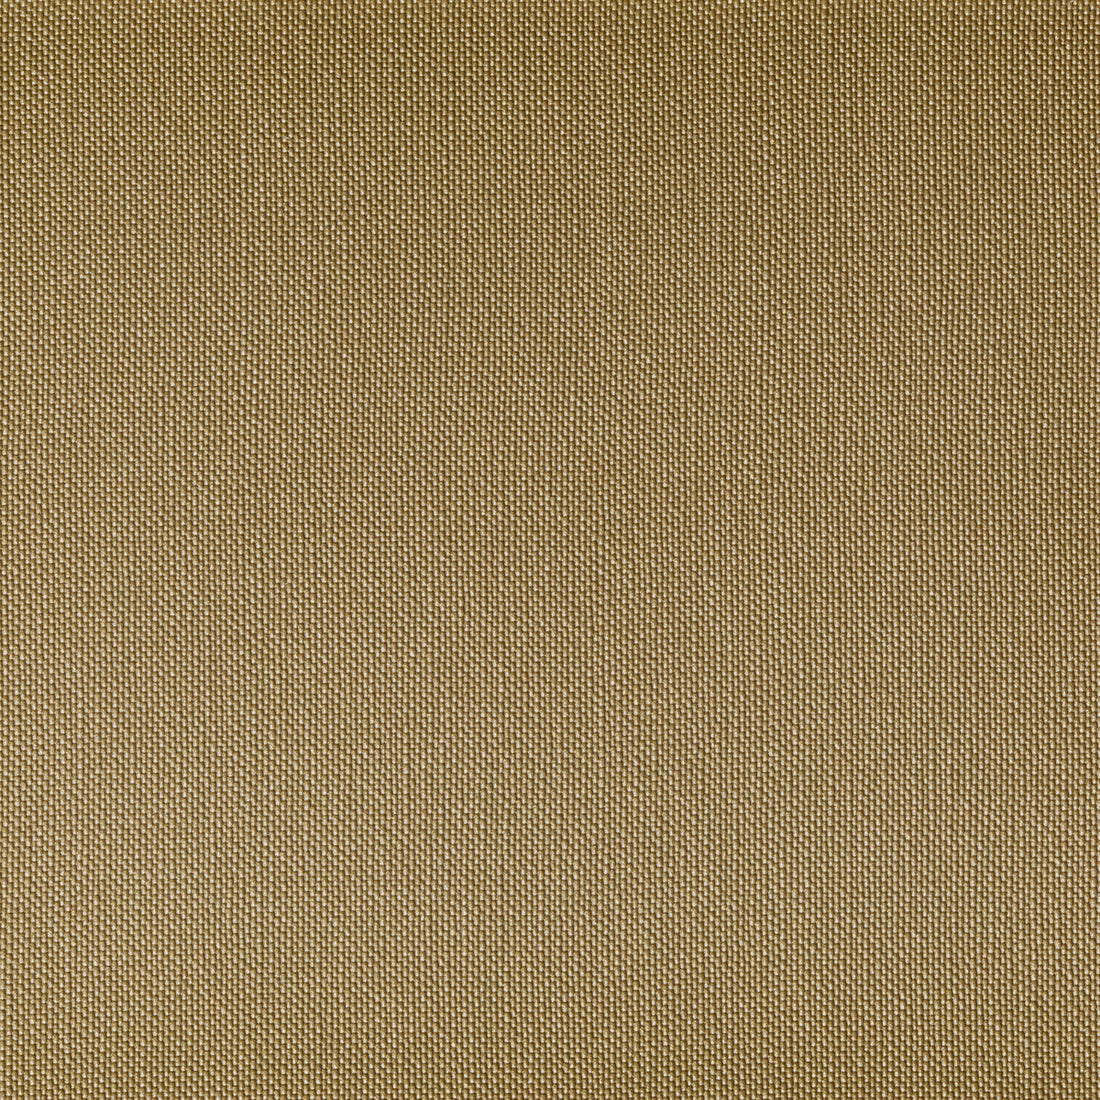 Ventura fabric in miso color - pattern VENTURA.16.0 - by Kravet Contract in the Foundations / Value collection